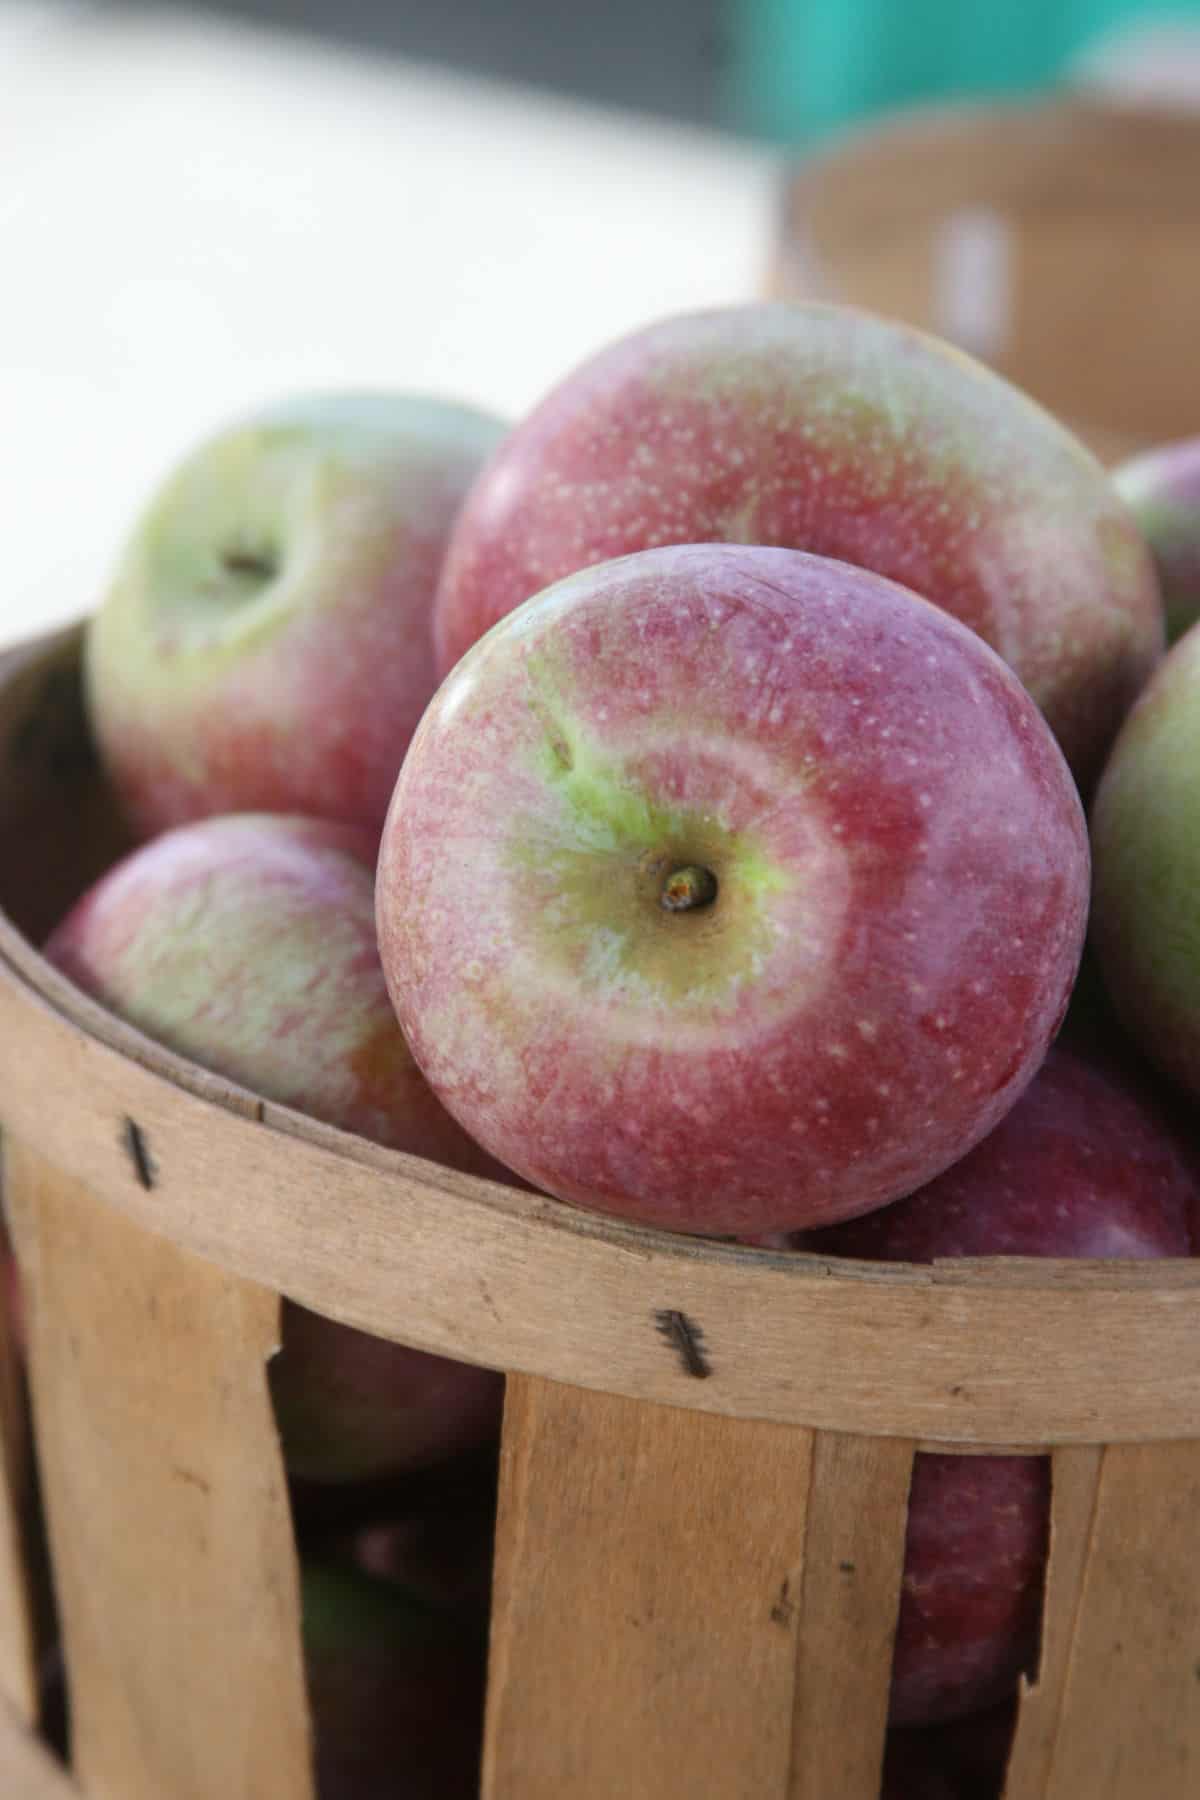 macoun apples in an apple orchard wooden basket.